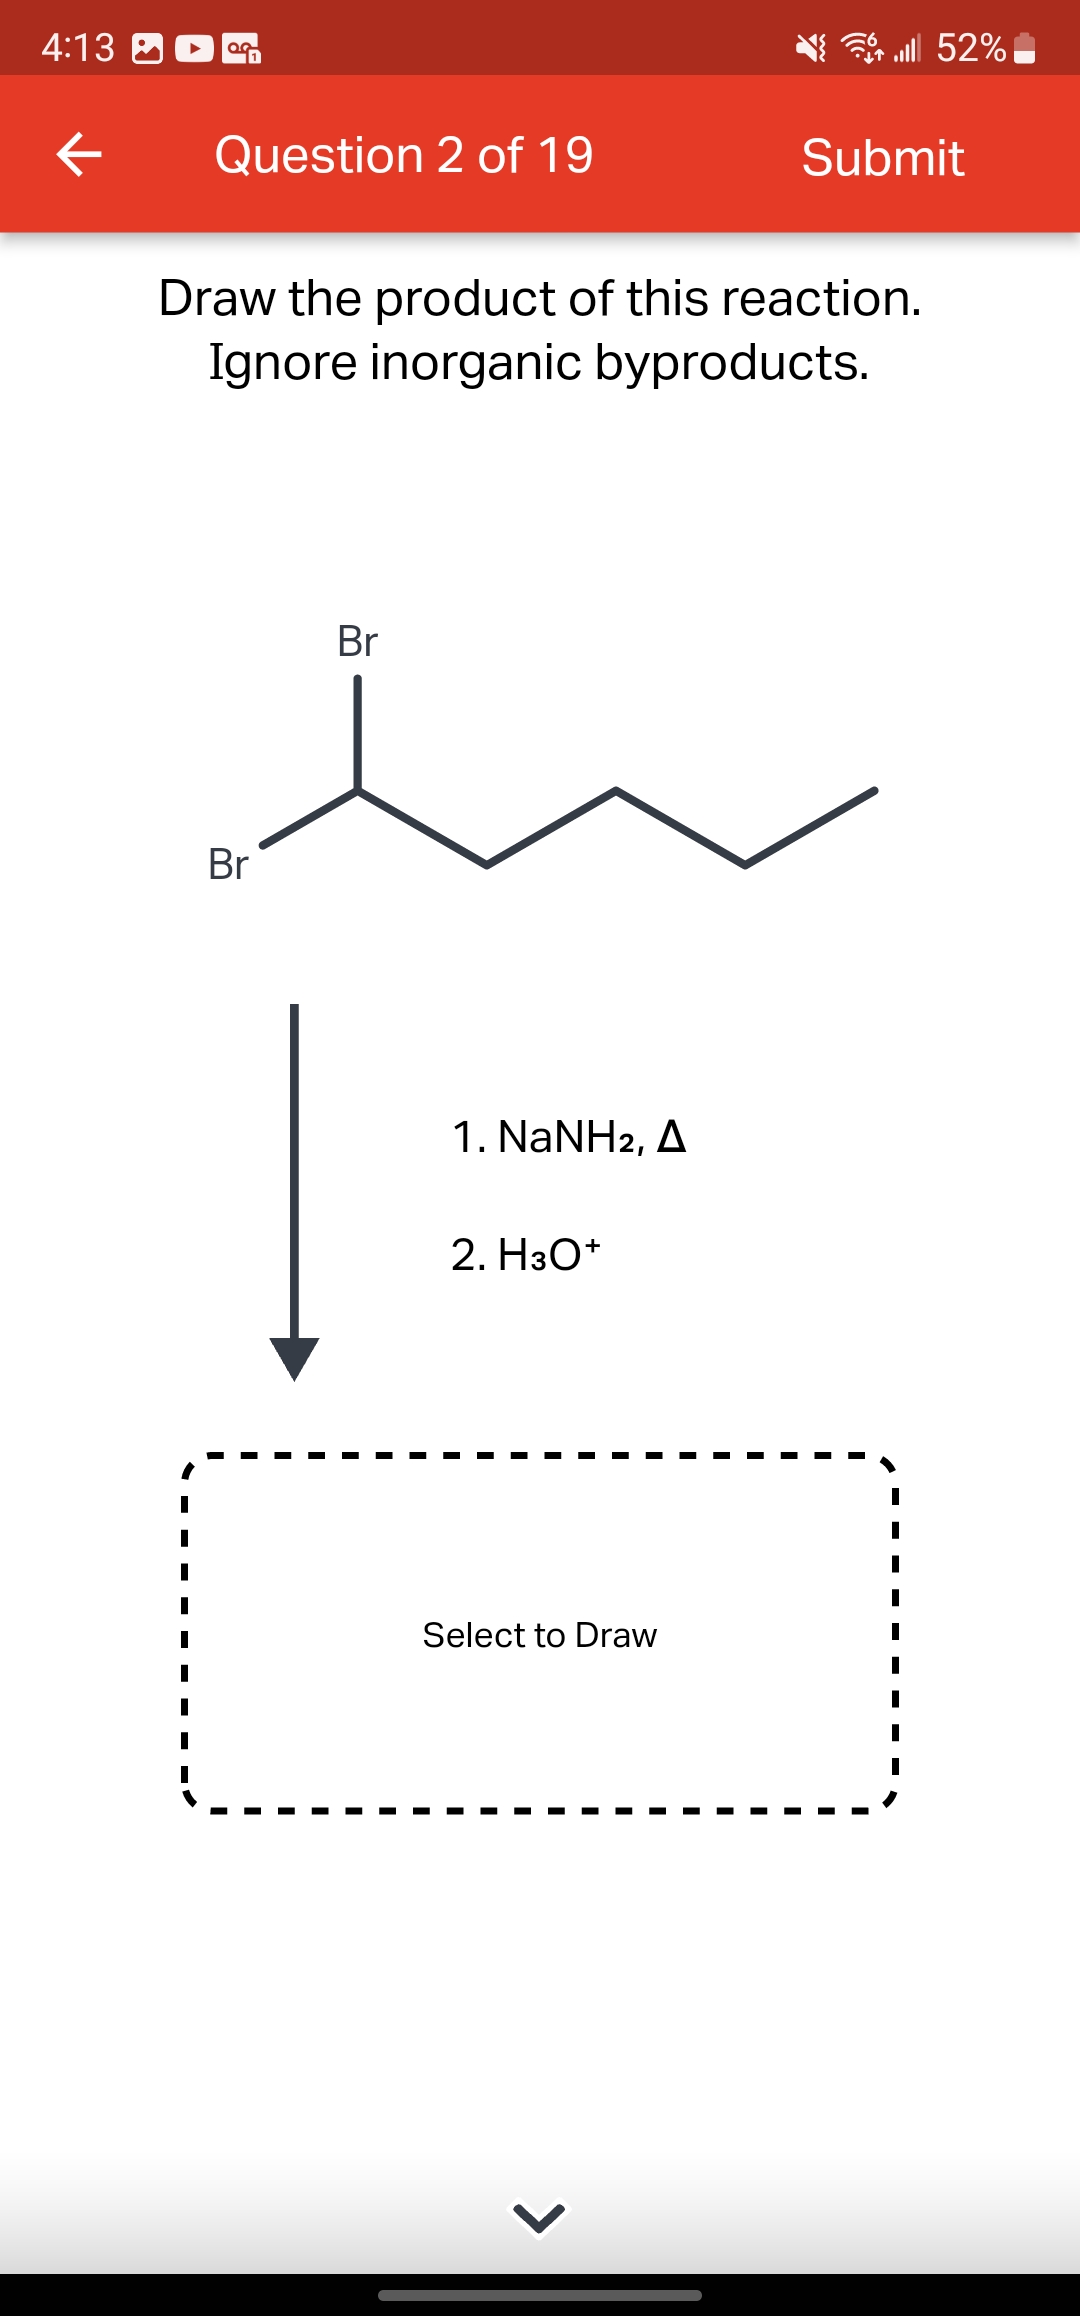 4:13
←
OG
Question 2 of 19
Br
Draw the product of this reaction.
Ignore inorganic byproducts.
Br
1. NaNH2, A
2. H3O+
Select to Draw
lll 52%
>
Submit